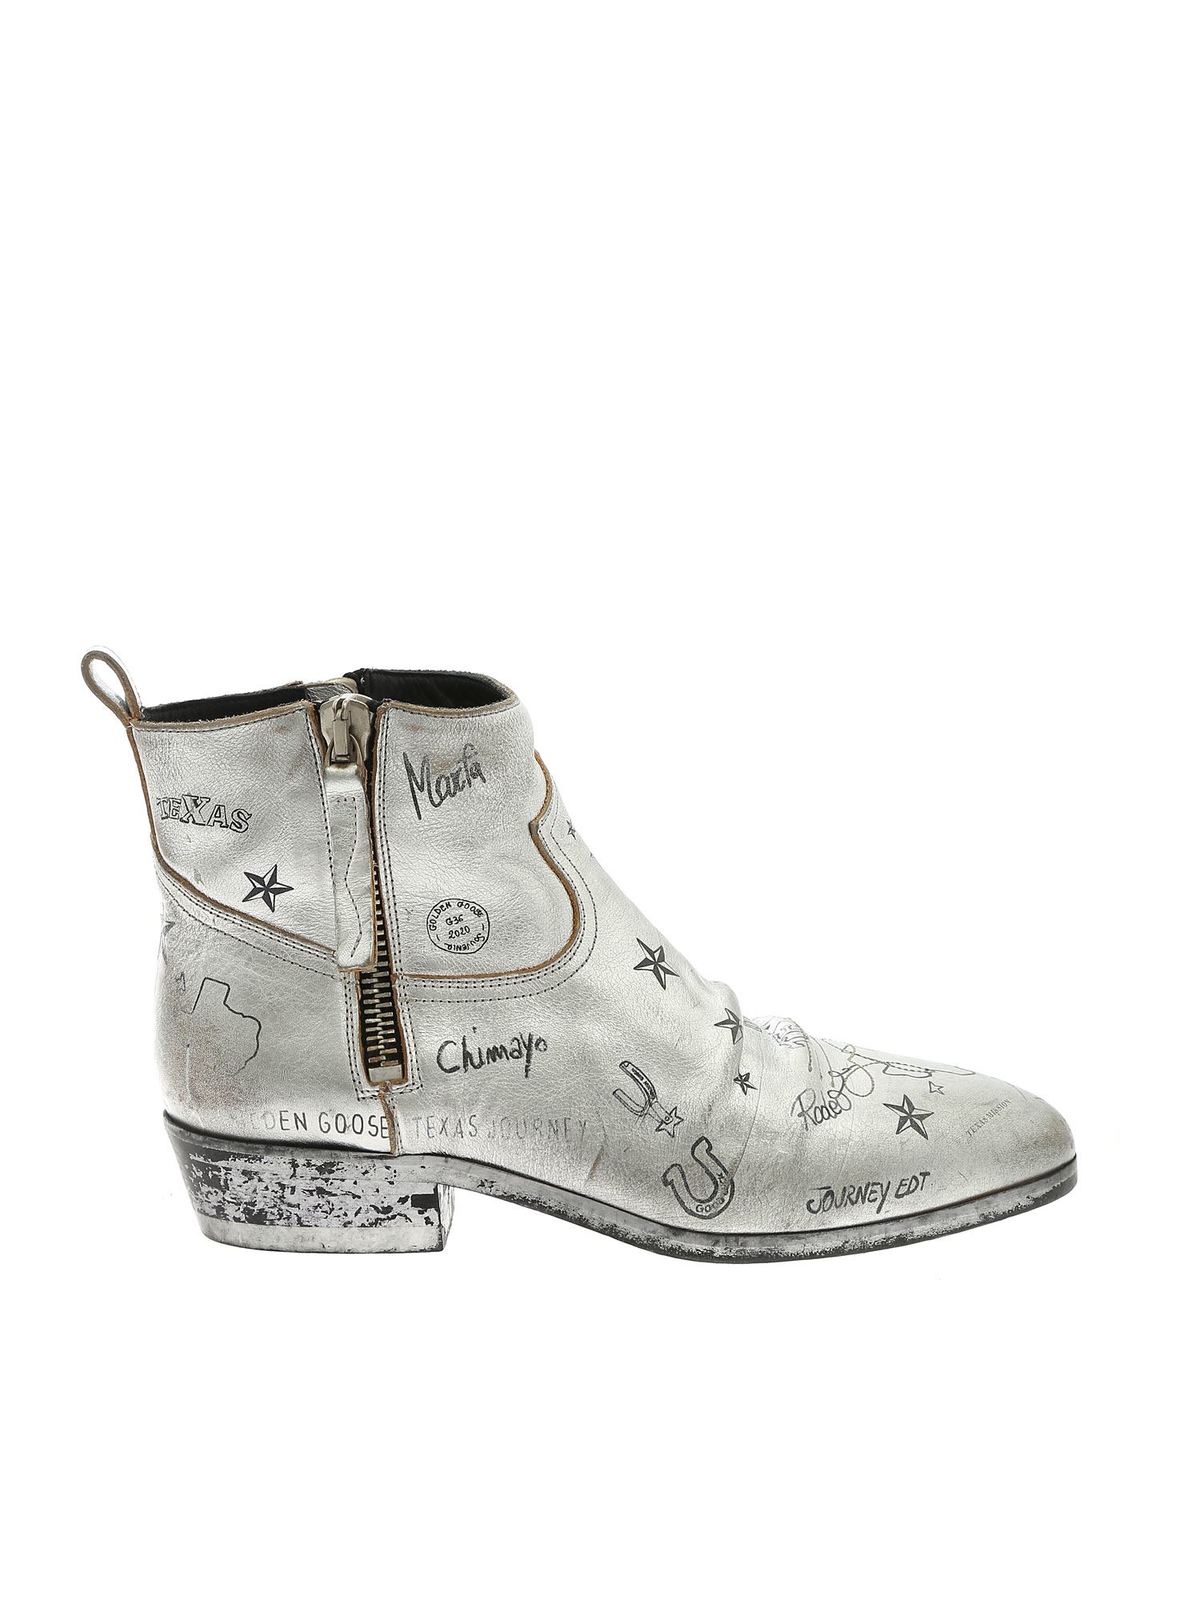 GOLDEN GOOSE VIAND ANKLE BOOTS IN SILVER colour